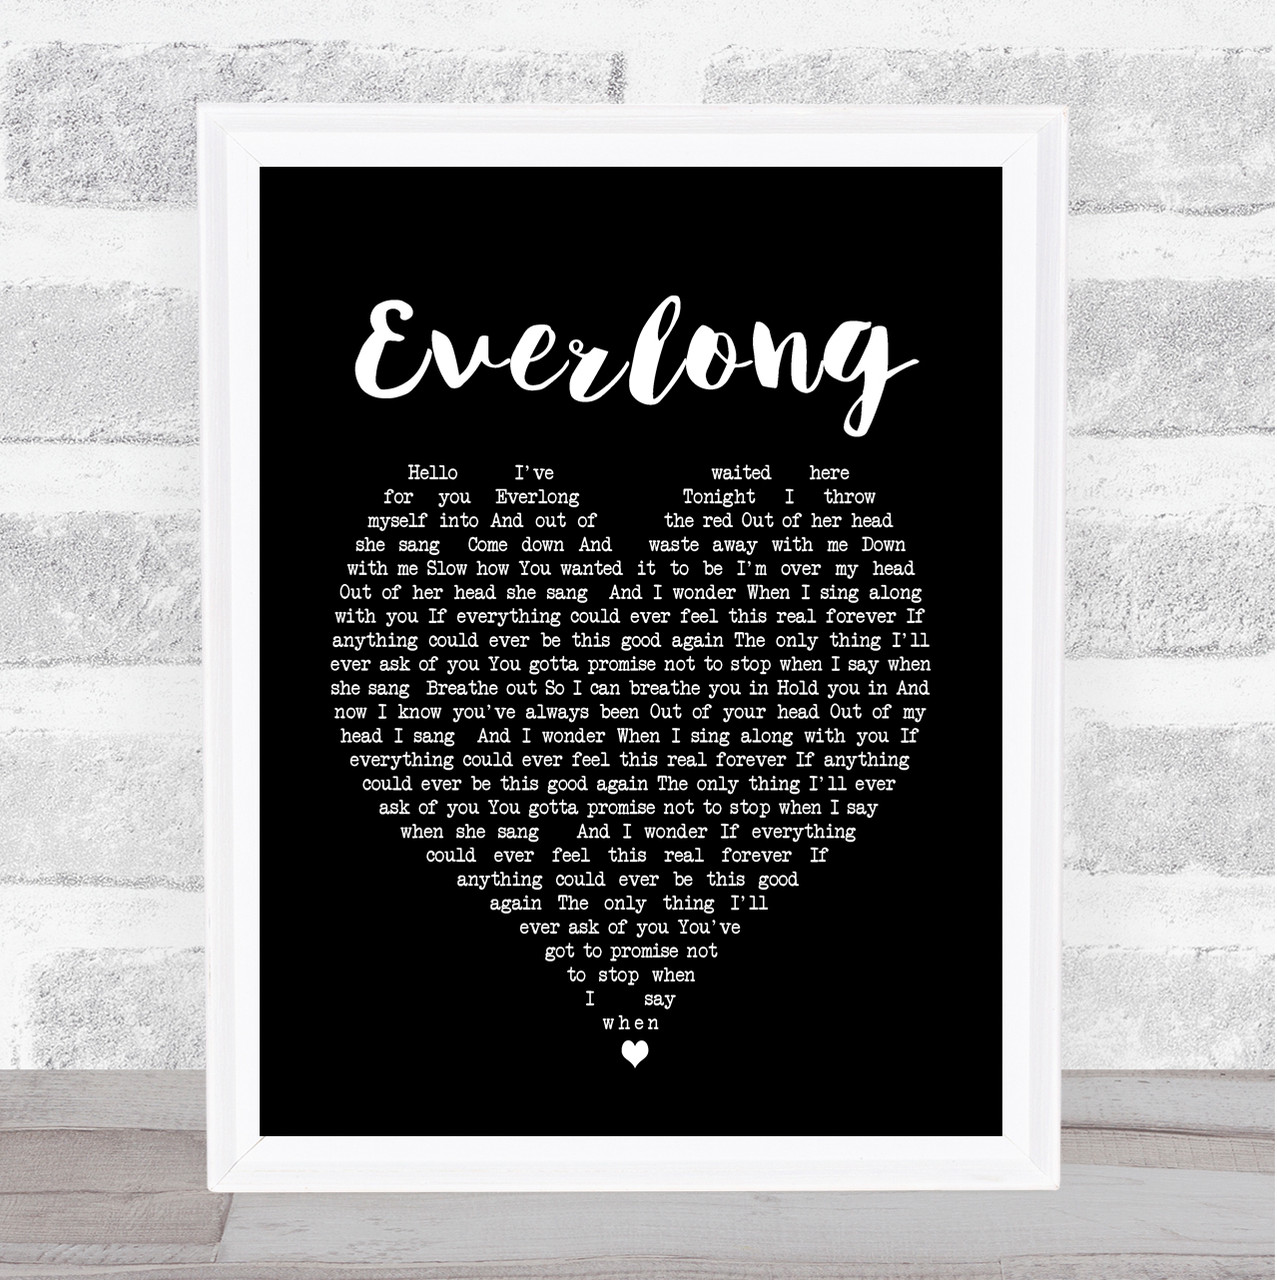 Foo Fighters - Everlong Song Lyrics Poster Painting Print on